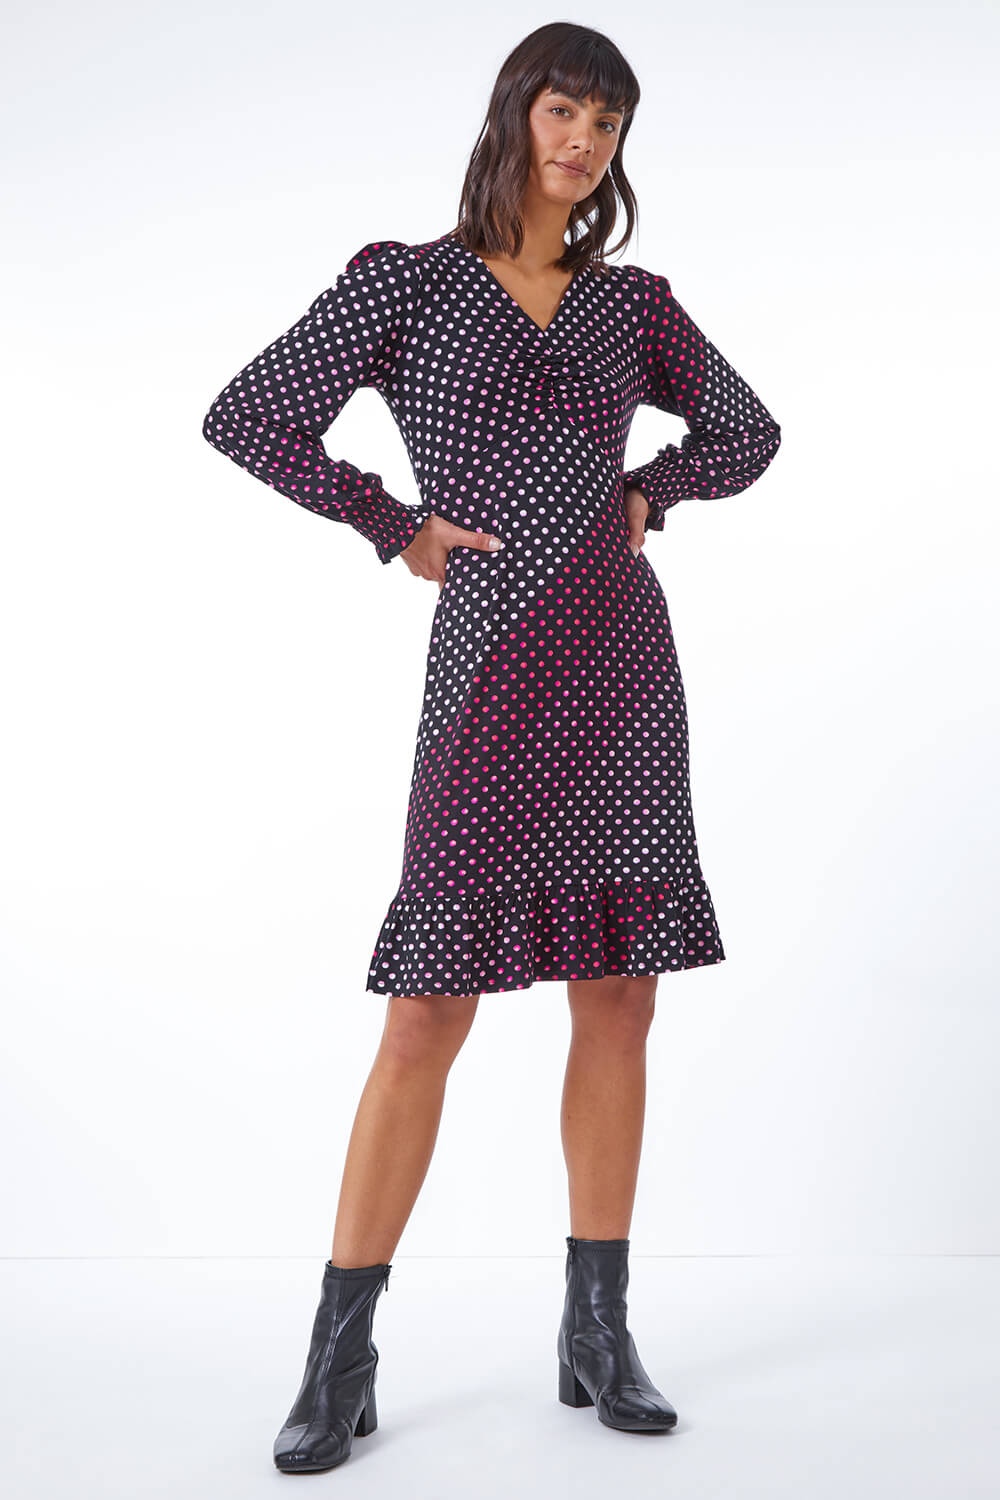 PINK Spot Print Ruched Detail Stretch Dress, Image 4 of 5